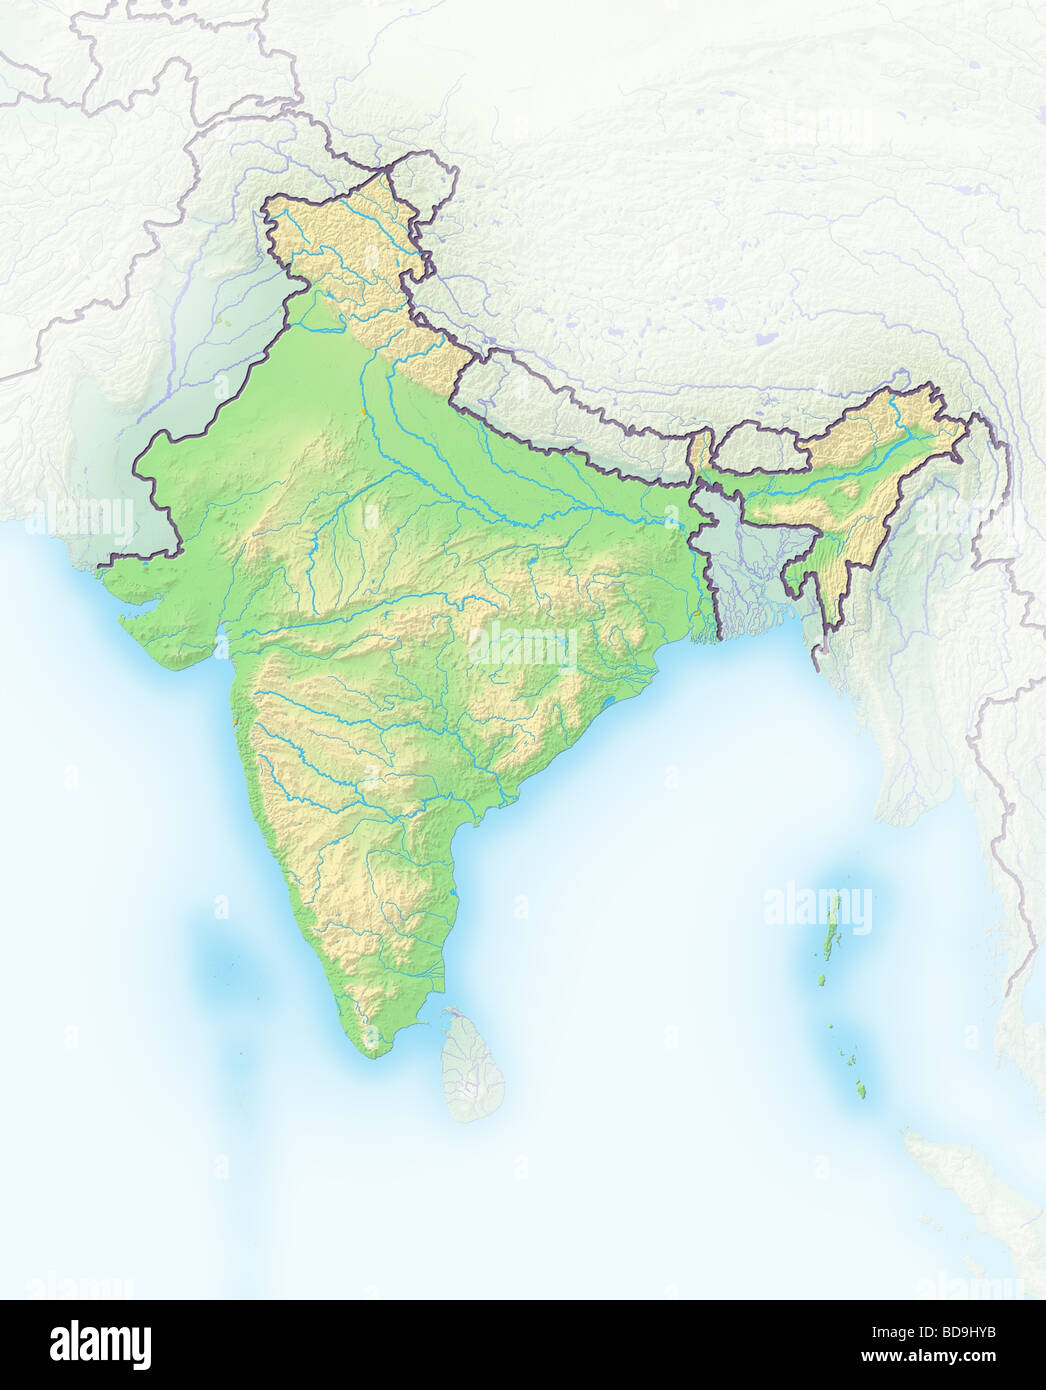 India, shaded relief map Stock Photo - Alamy